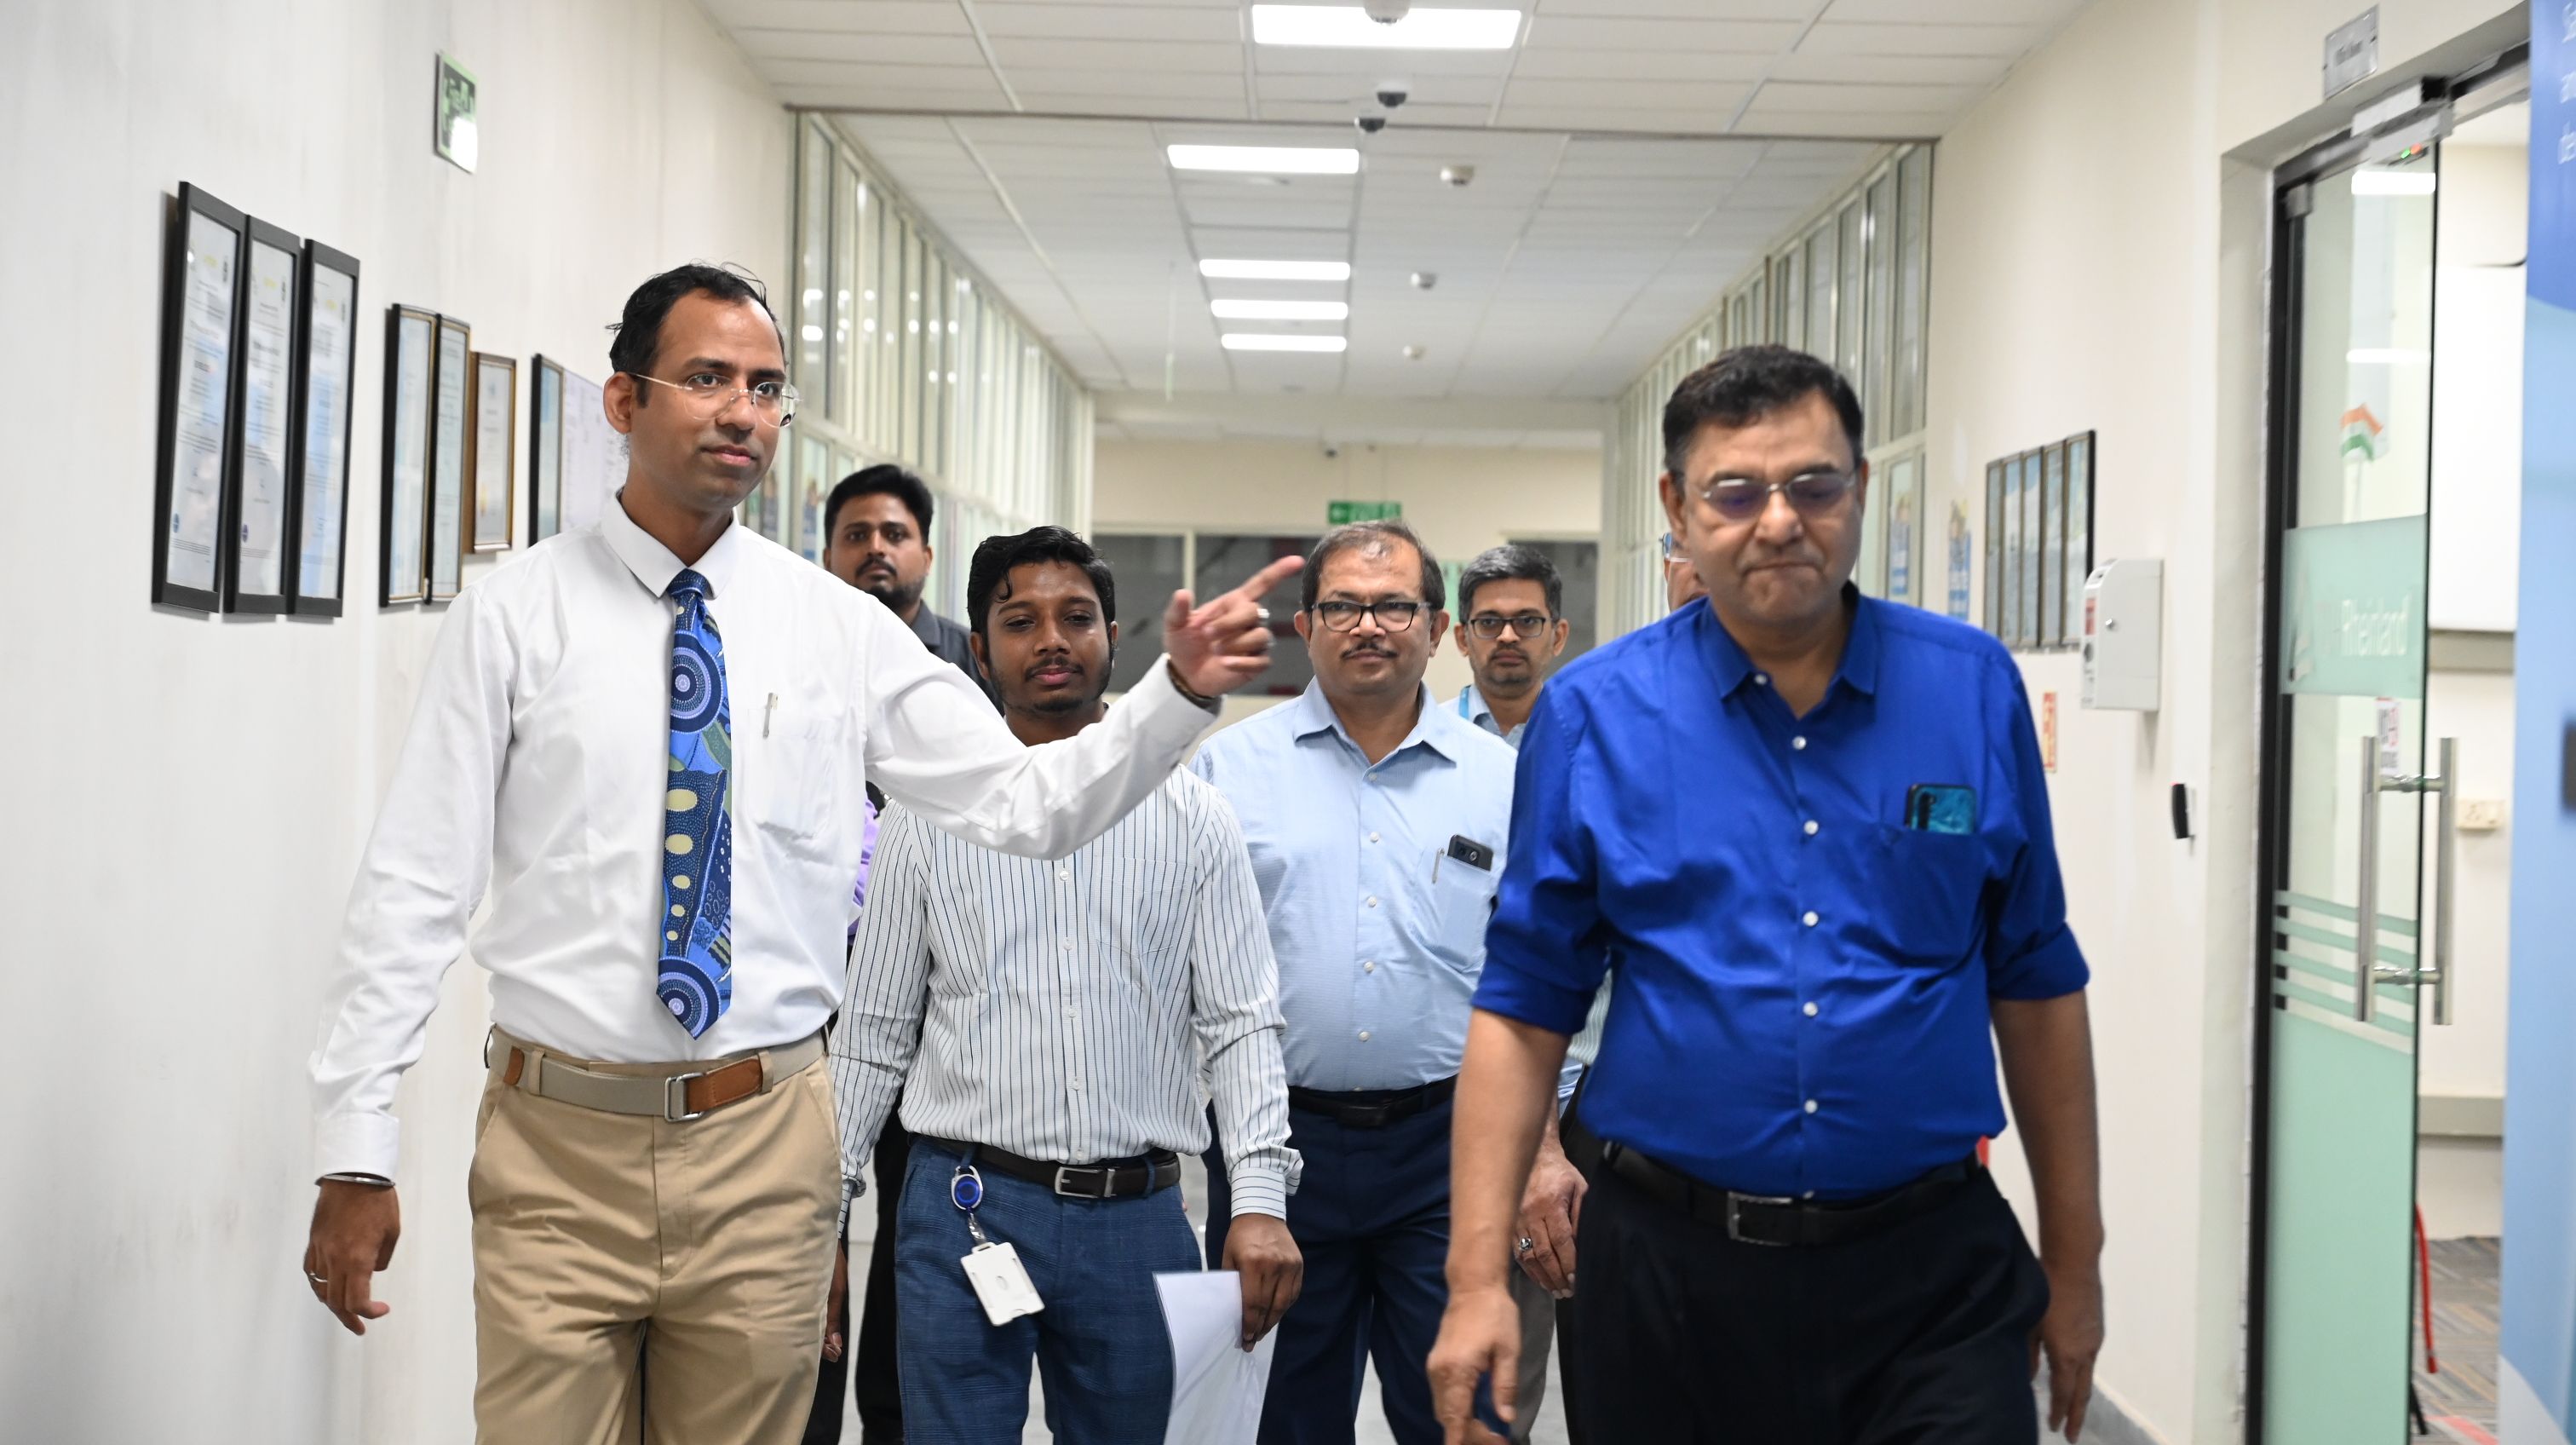 Shri Pramod Kumar Tiwari, Director General of the Bureau of Indian Standards, collaborates with Dr. Jitendra Sharma at AMTZ to advance medical and healthcare technology in India